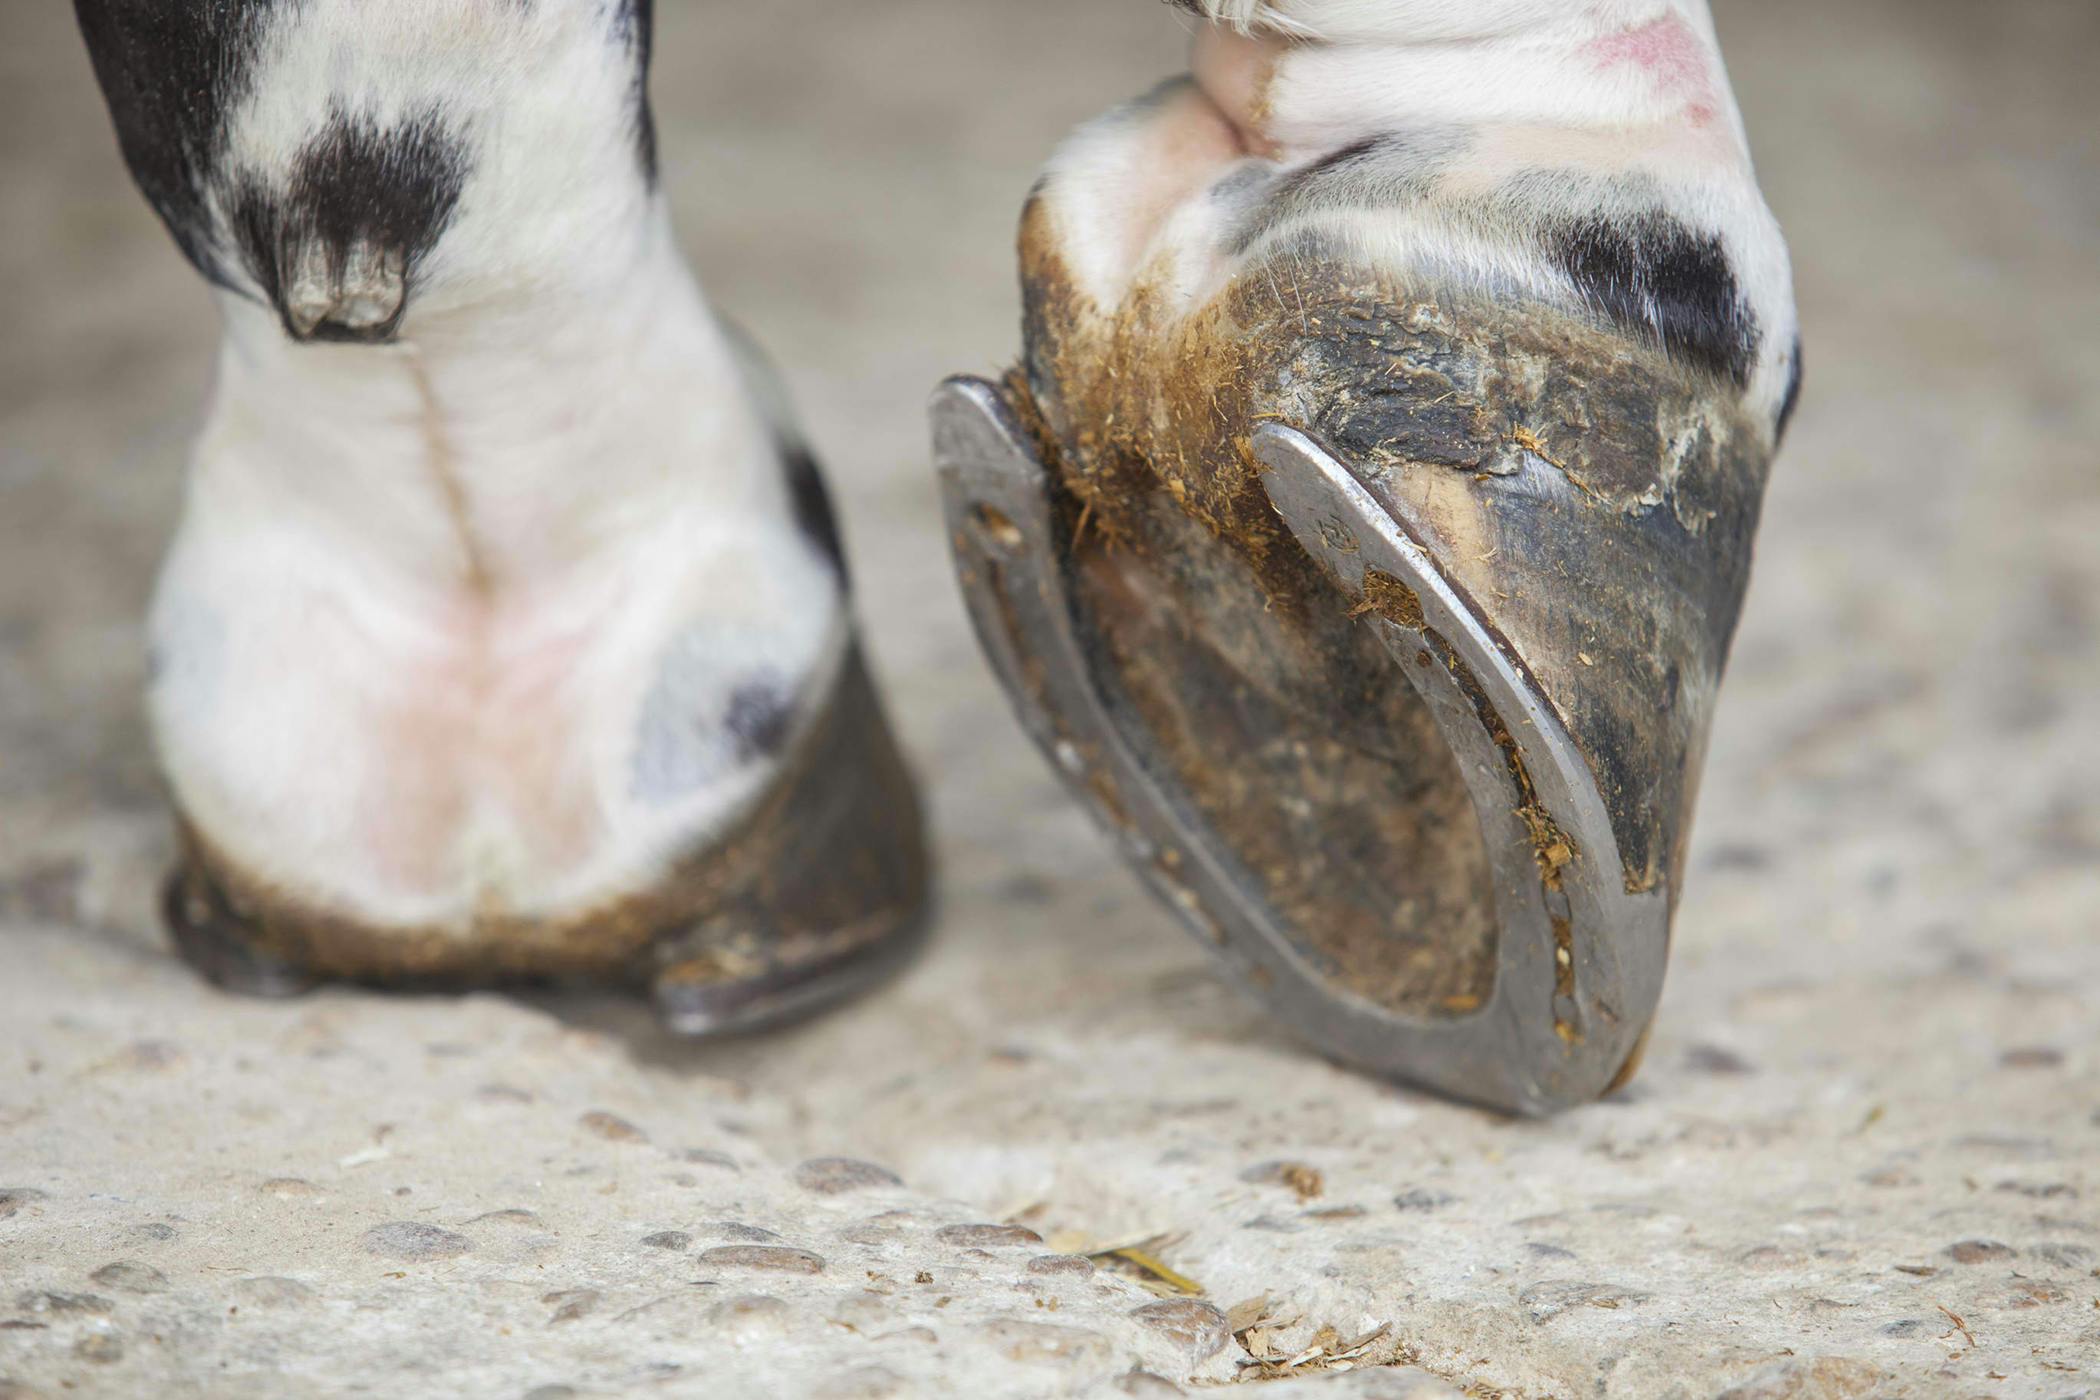 Hoof Problems in Horses - Symptoms, Causes, Diagnosis, Treatment